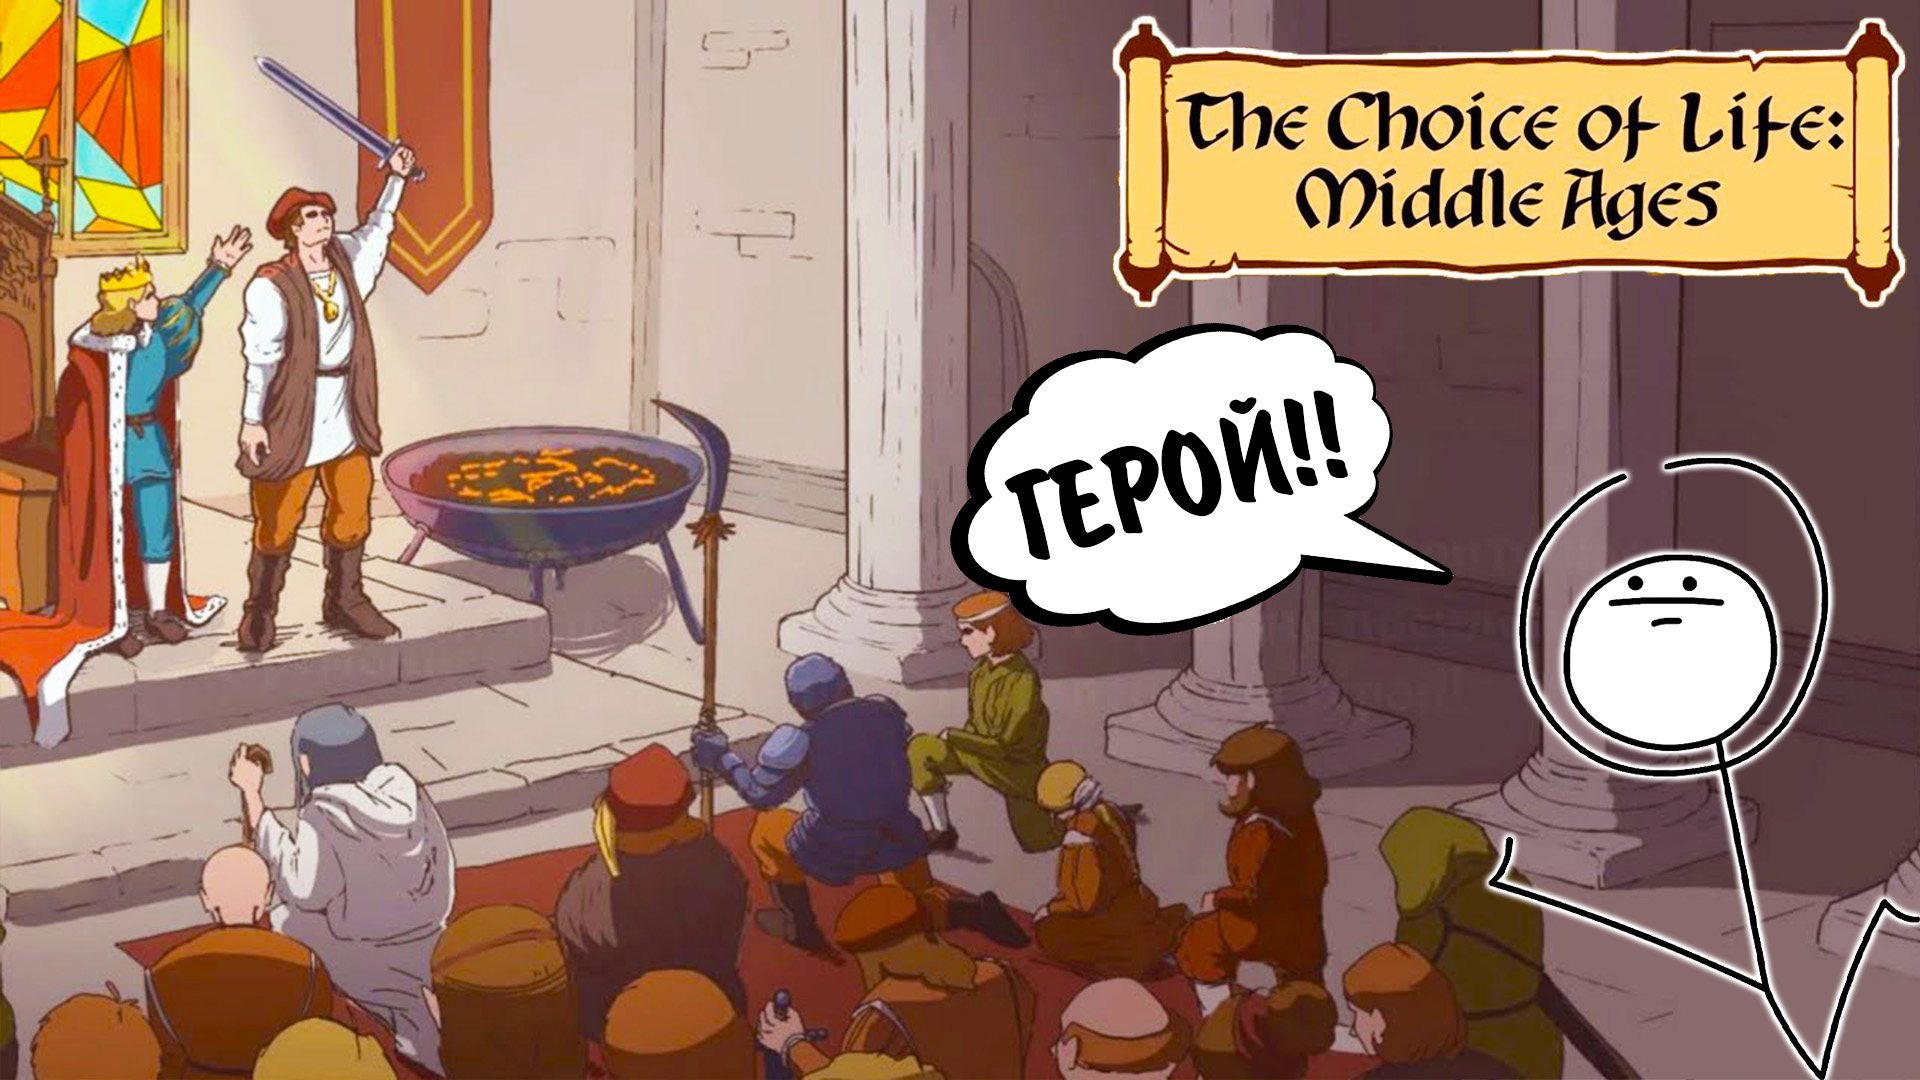 The Choice of Life: Middle Ages #3 - ГЕРОЙ!!